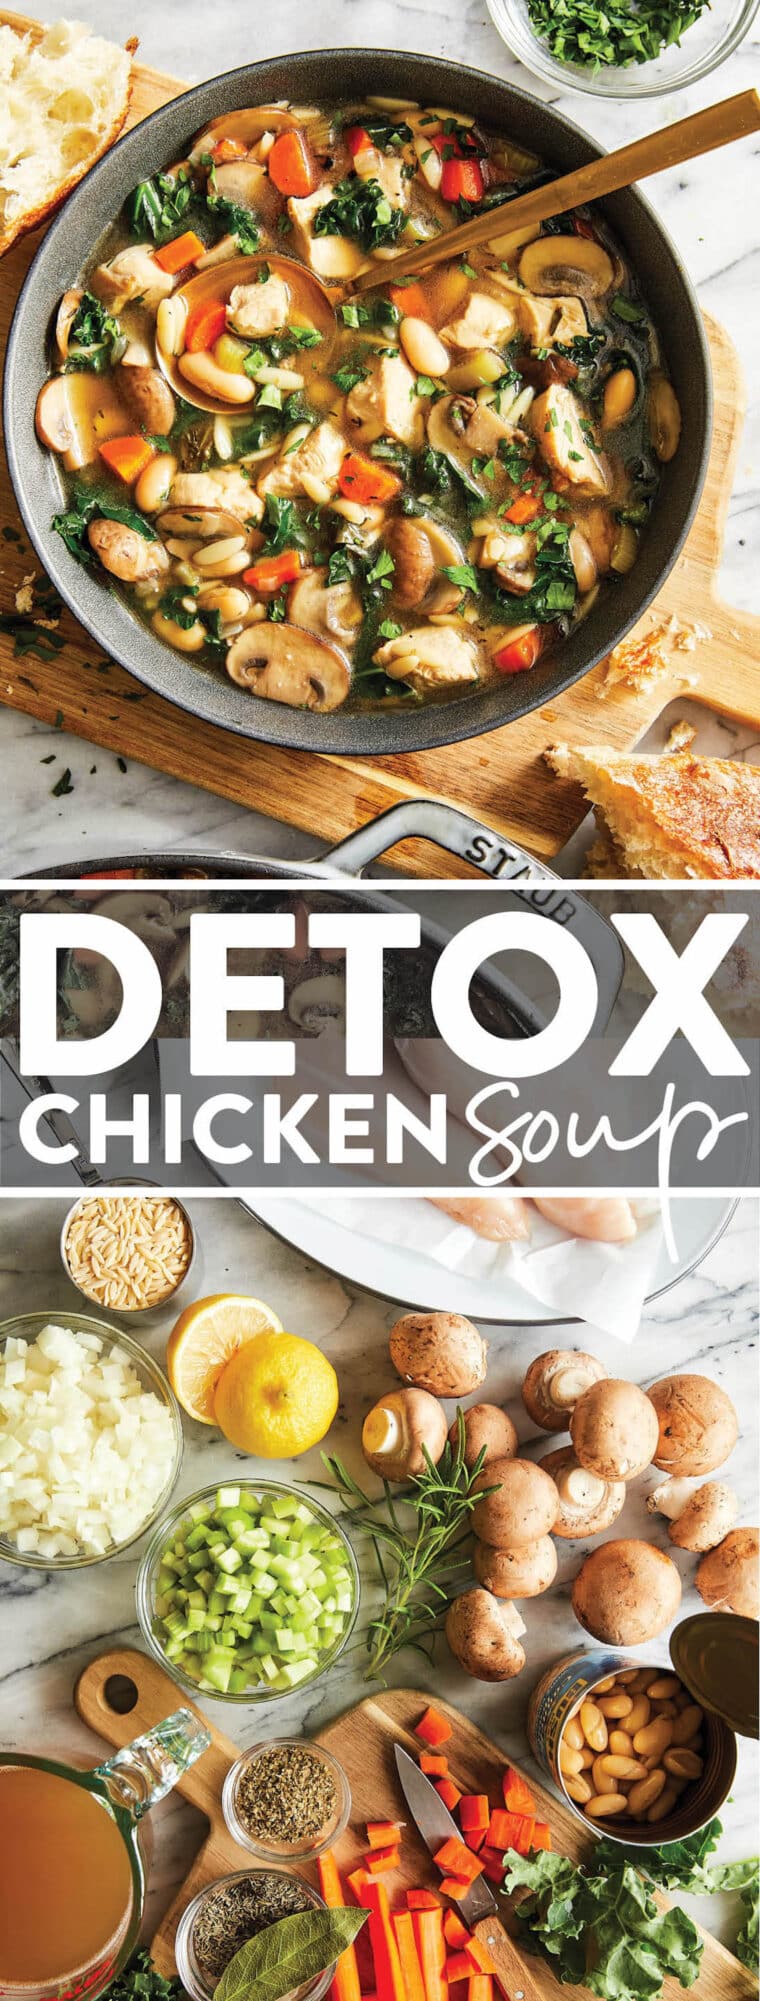 Detox Chicken Soup - Cleansing, immune-boosting soup with all the goodness (kale, mushrooms, celery, carrots) without compromising any taste!